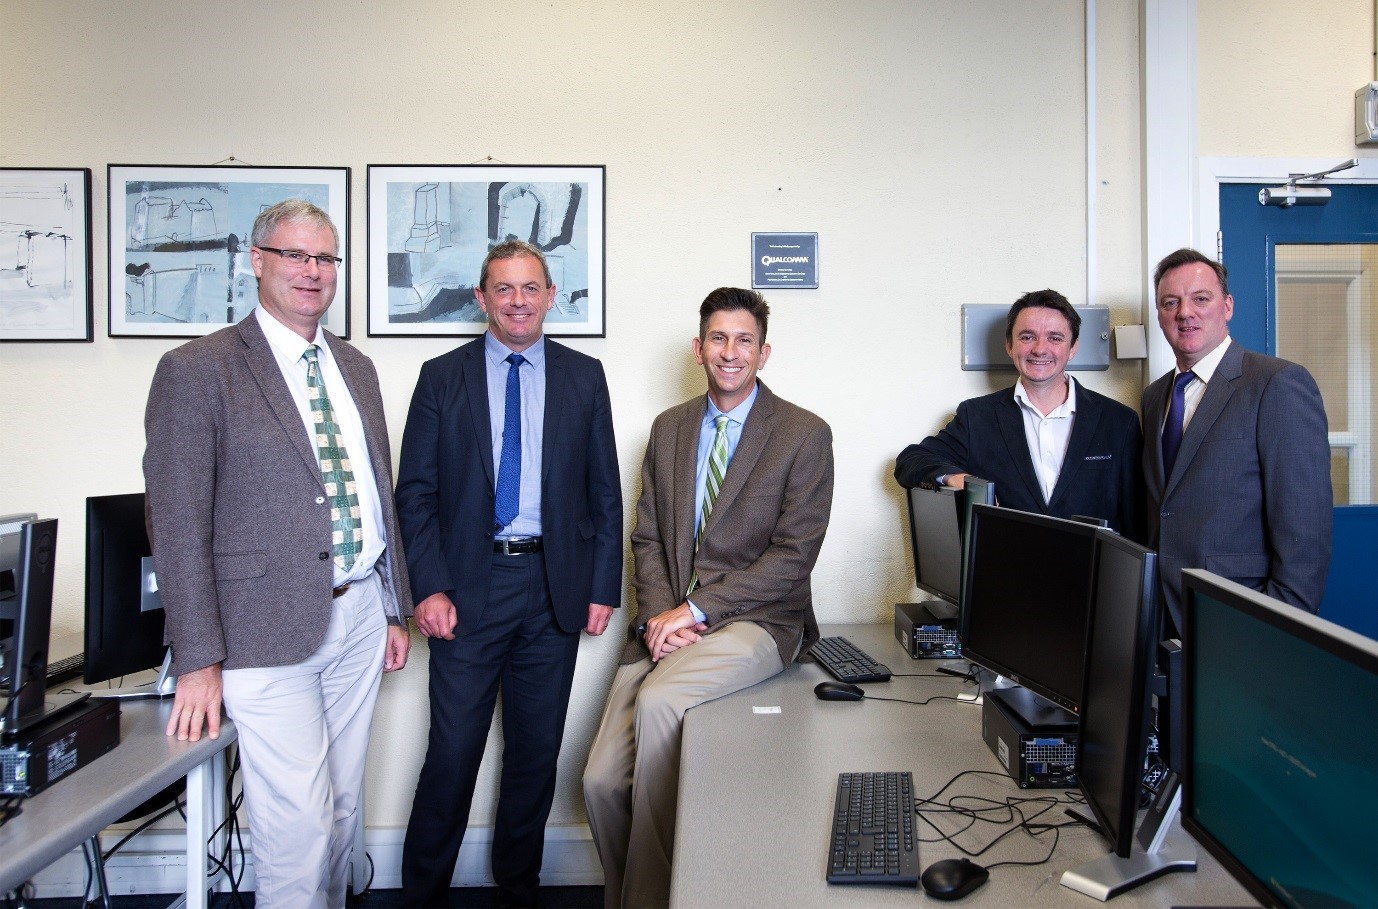 Qualcomm Sponsors Upgrading of the CAD Lab in the School of Engineering